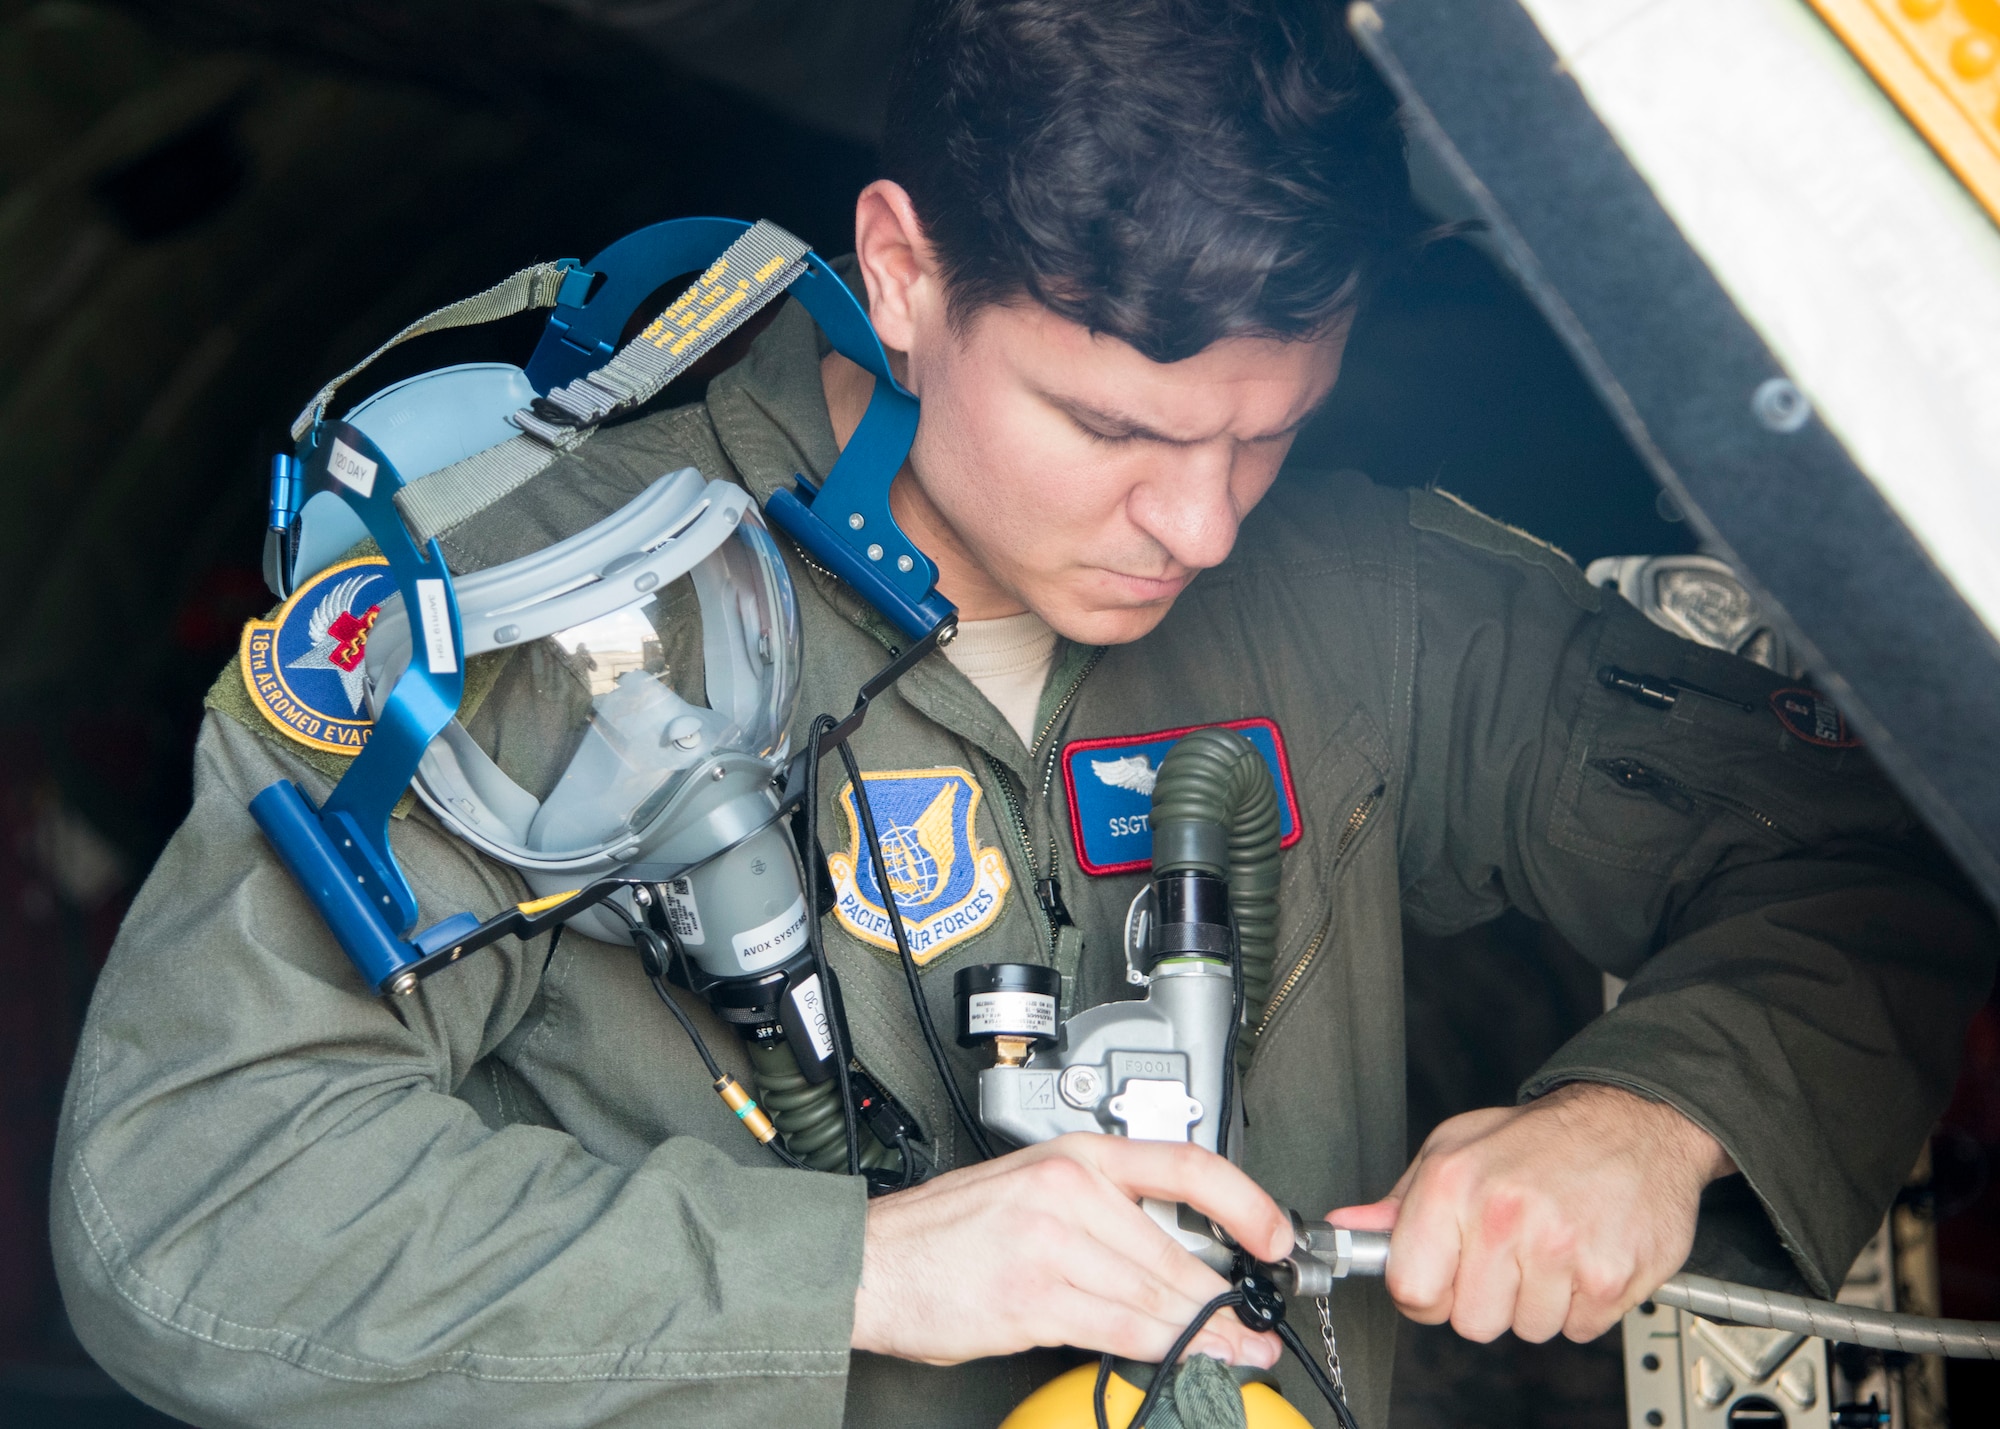 U.S. Air Force Staff Sgt. Dylan King, 18th Aeromedical Evacuation Squadron AE technician, charges an emergency respirator air tank aboard a 384th Air Refueling Squadron KC-135 Stratotanker during an AE exercise near Kadena Air Base, Japan, Feb. 19, 2019. Airmen of the 18th AES rely on practice sorties with flying units like the 384th Air Refueling Squadron to hone their mission-essential skills. (U.S. Air Force photo by Senior Airman Ryan Lackey)